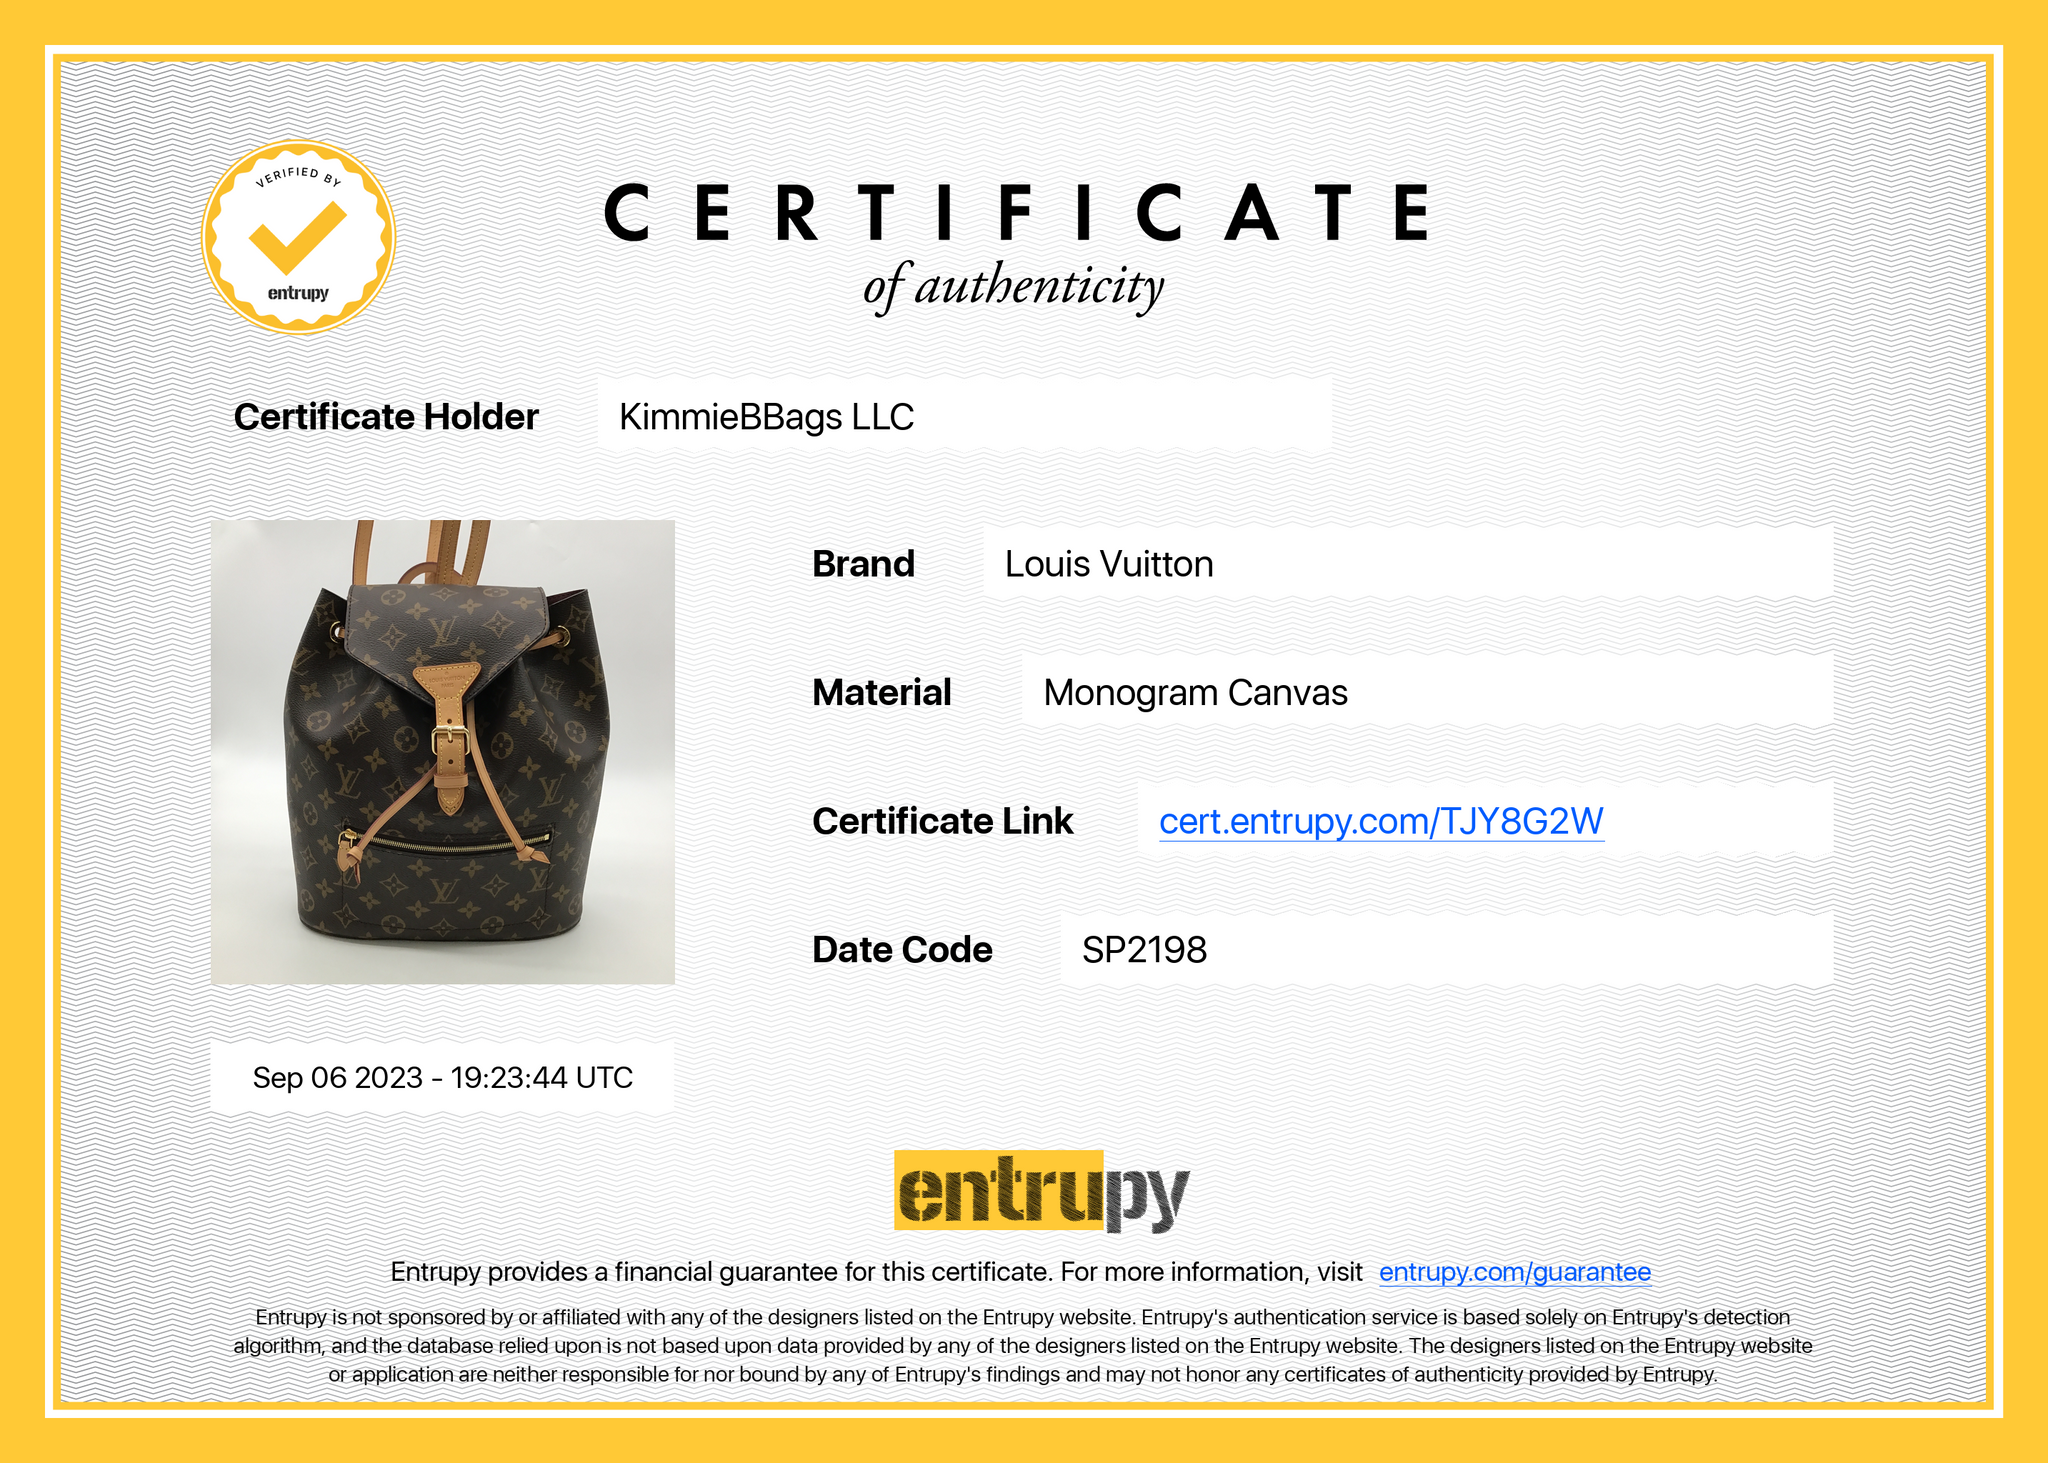 Purchase Result  Louis Vuitton Monogram Empreinte Sorbonne Backpack With  Pins